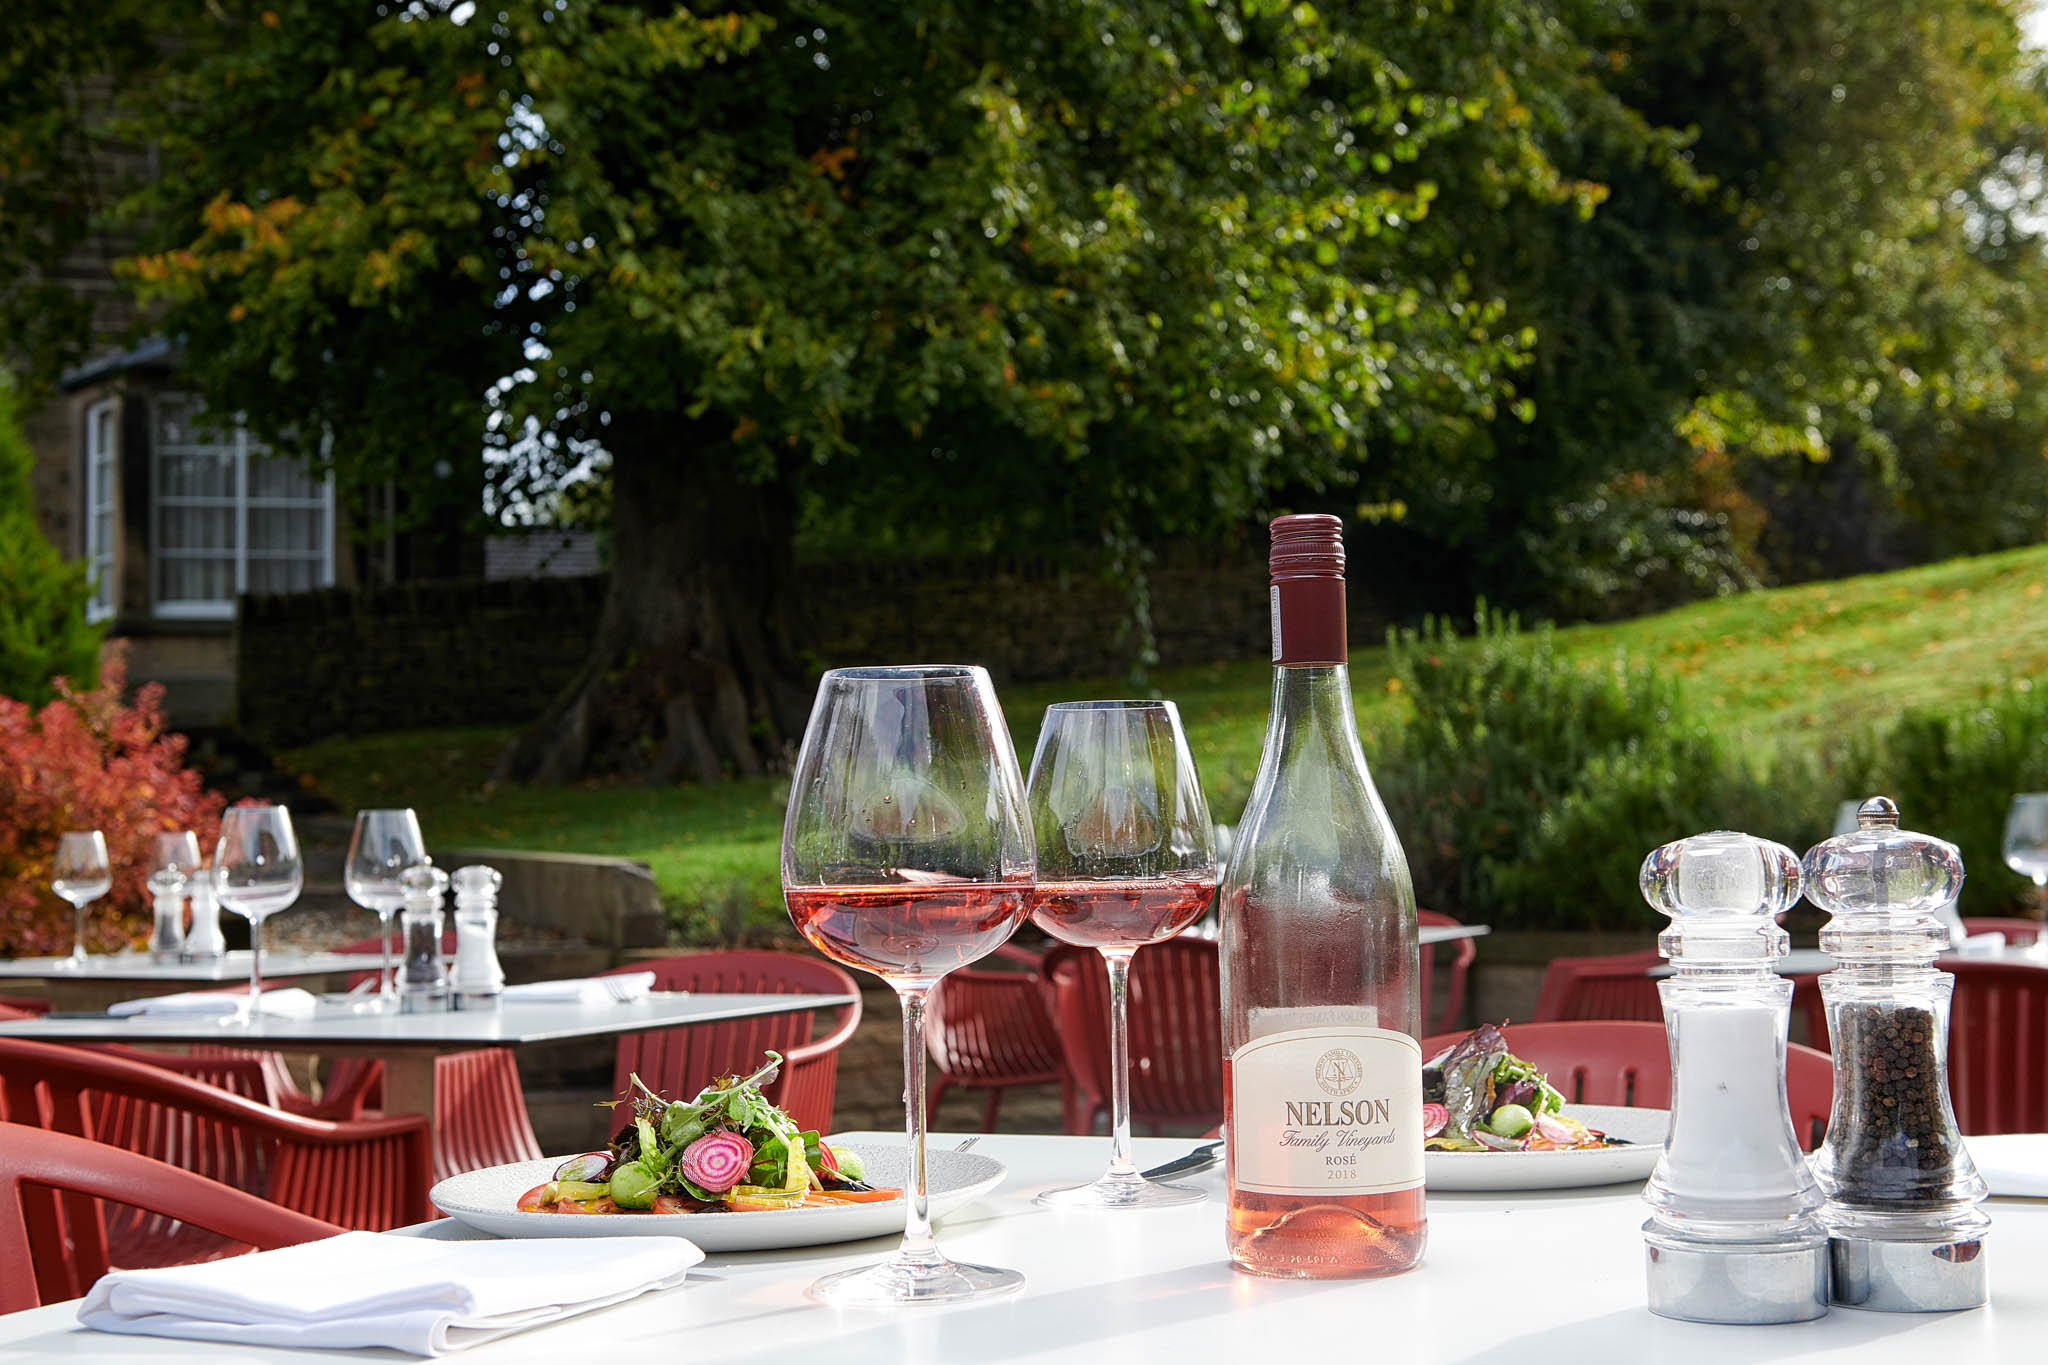 The Devonshire Arms Beeley, Chatsworth Estate, Dining Outdoors, Summer, Rose Wine